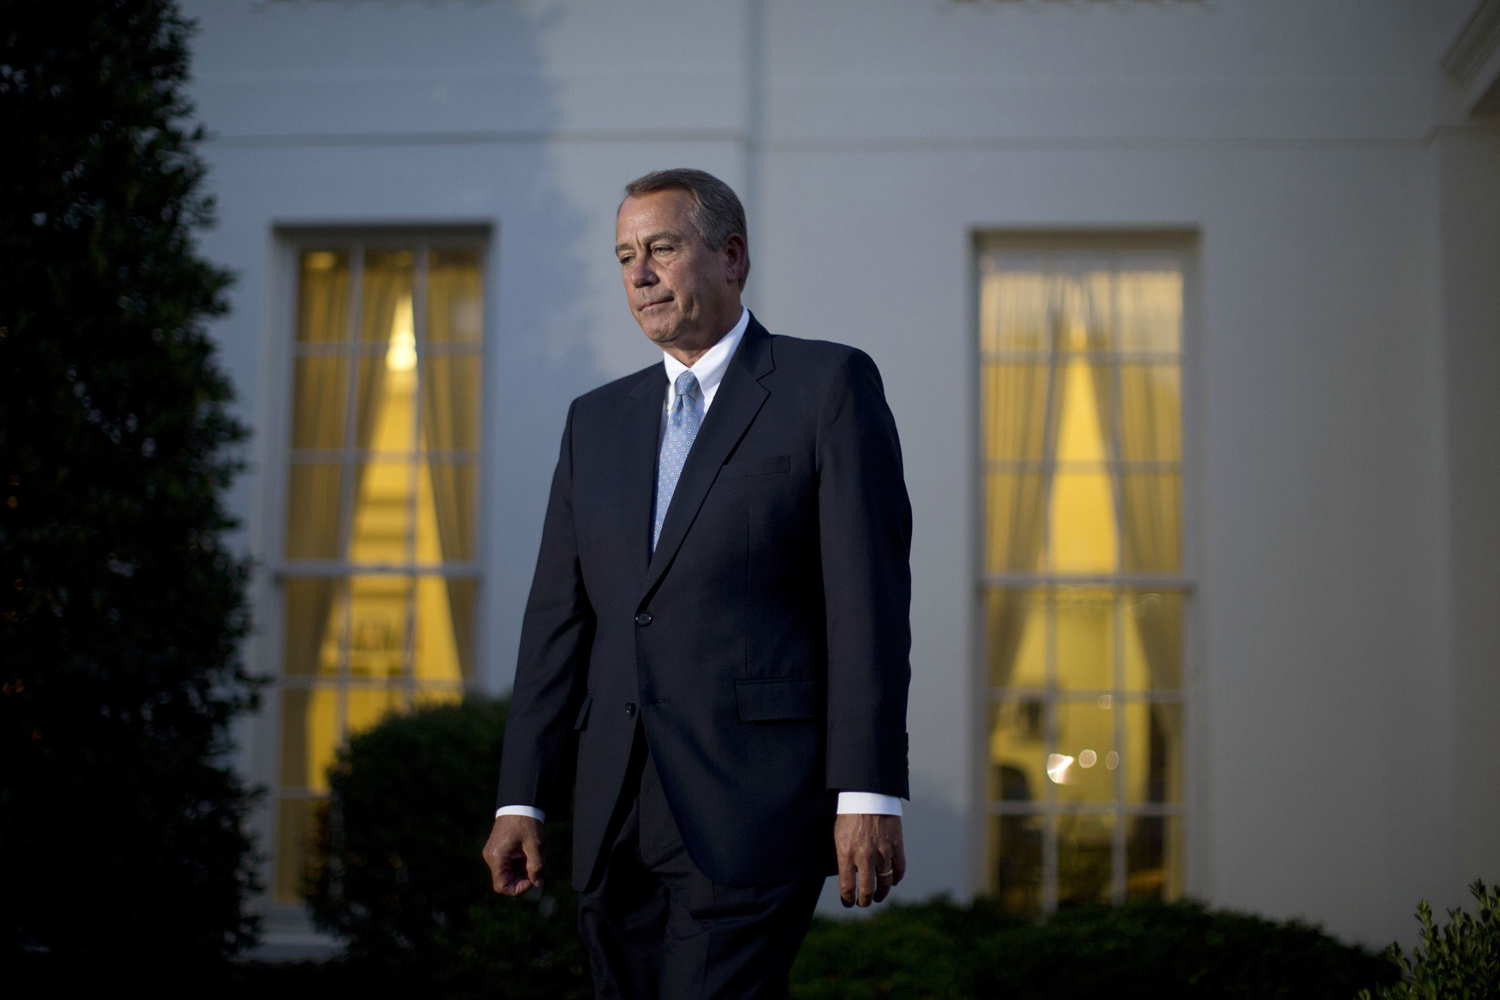 Oct. 2, 2013. U.S. House Speaker John Boehner (R-OH) walks from a meeting with U.S. President Barack Obama, House Minority Leader Nancy Pelosi (D-CA), Senate Majority Leader Harry Reid (D-NV) and Senate Minority Leader Mitch McConnell (R-KY) outside the West Wing of the White House in Washington.